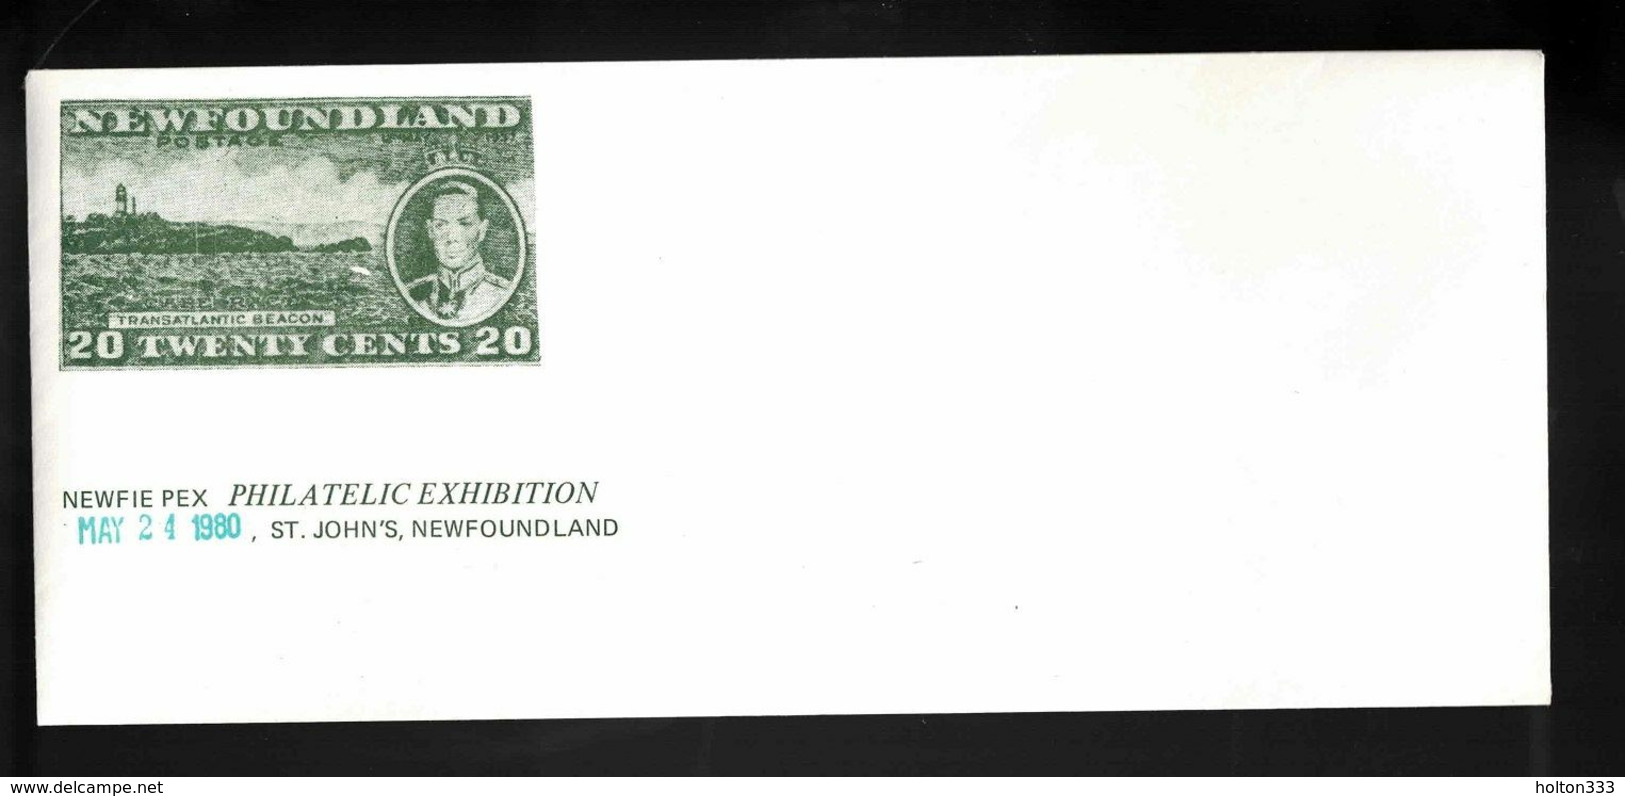 NEWFOUNDLAND Cover Blank - Two Newfie Pex Exhibition May 1980 - HerdenkingsOmslagen